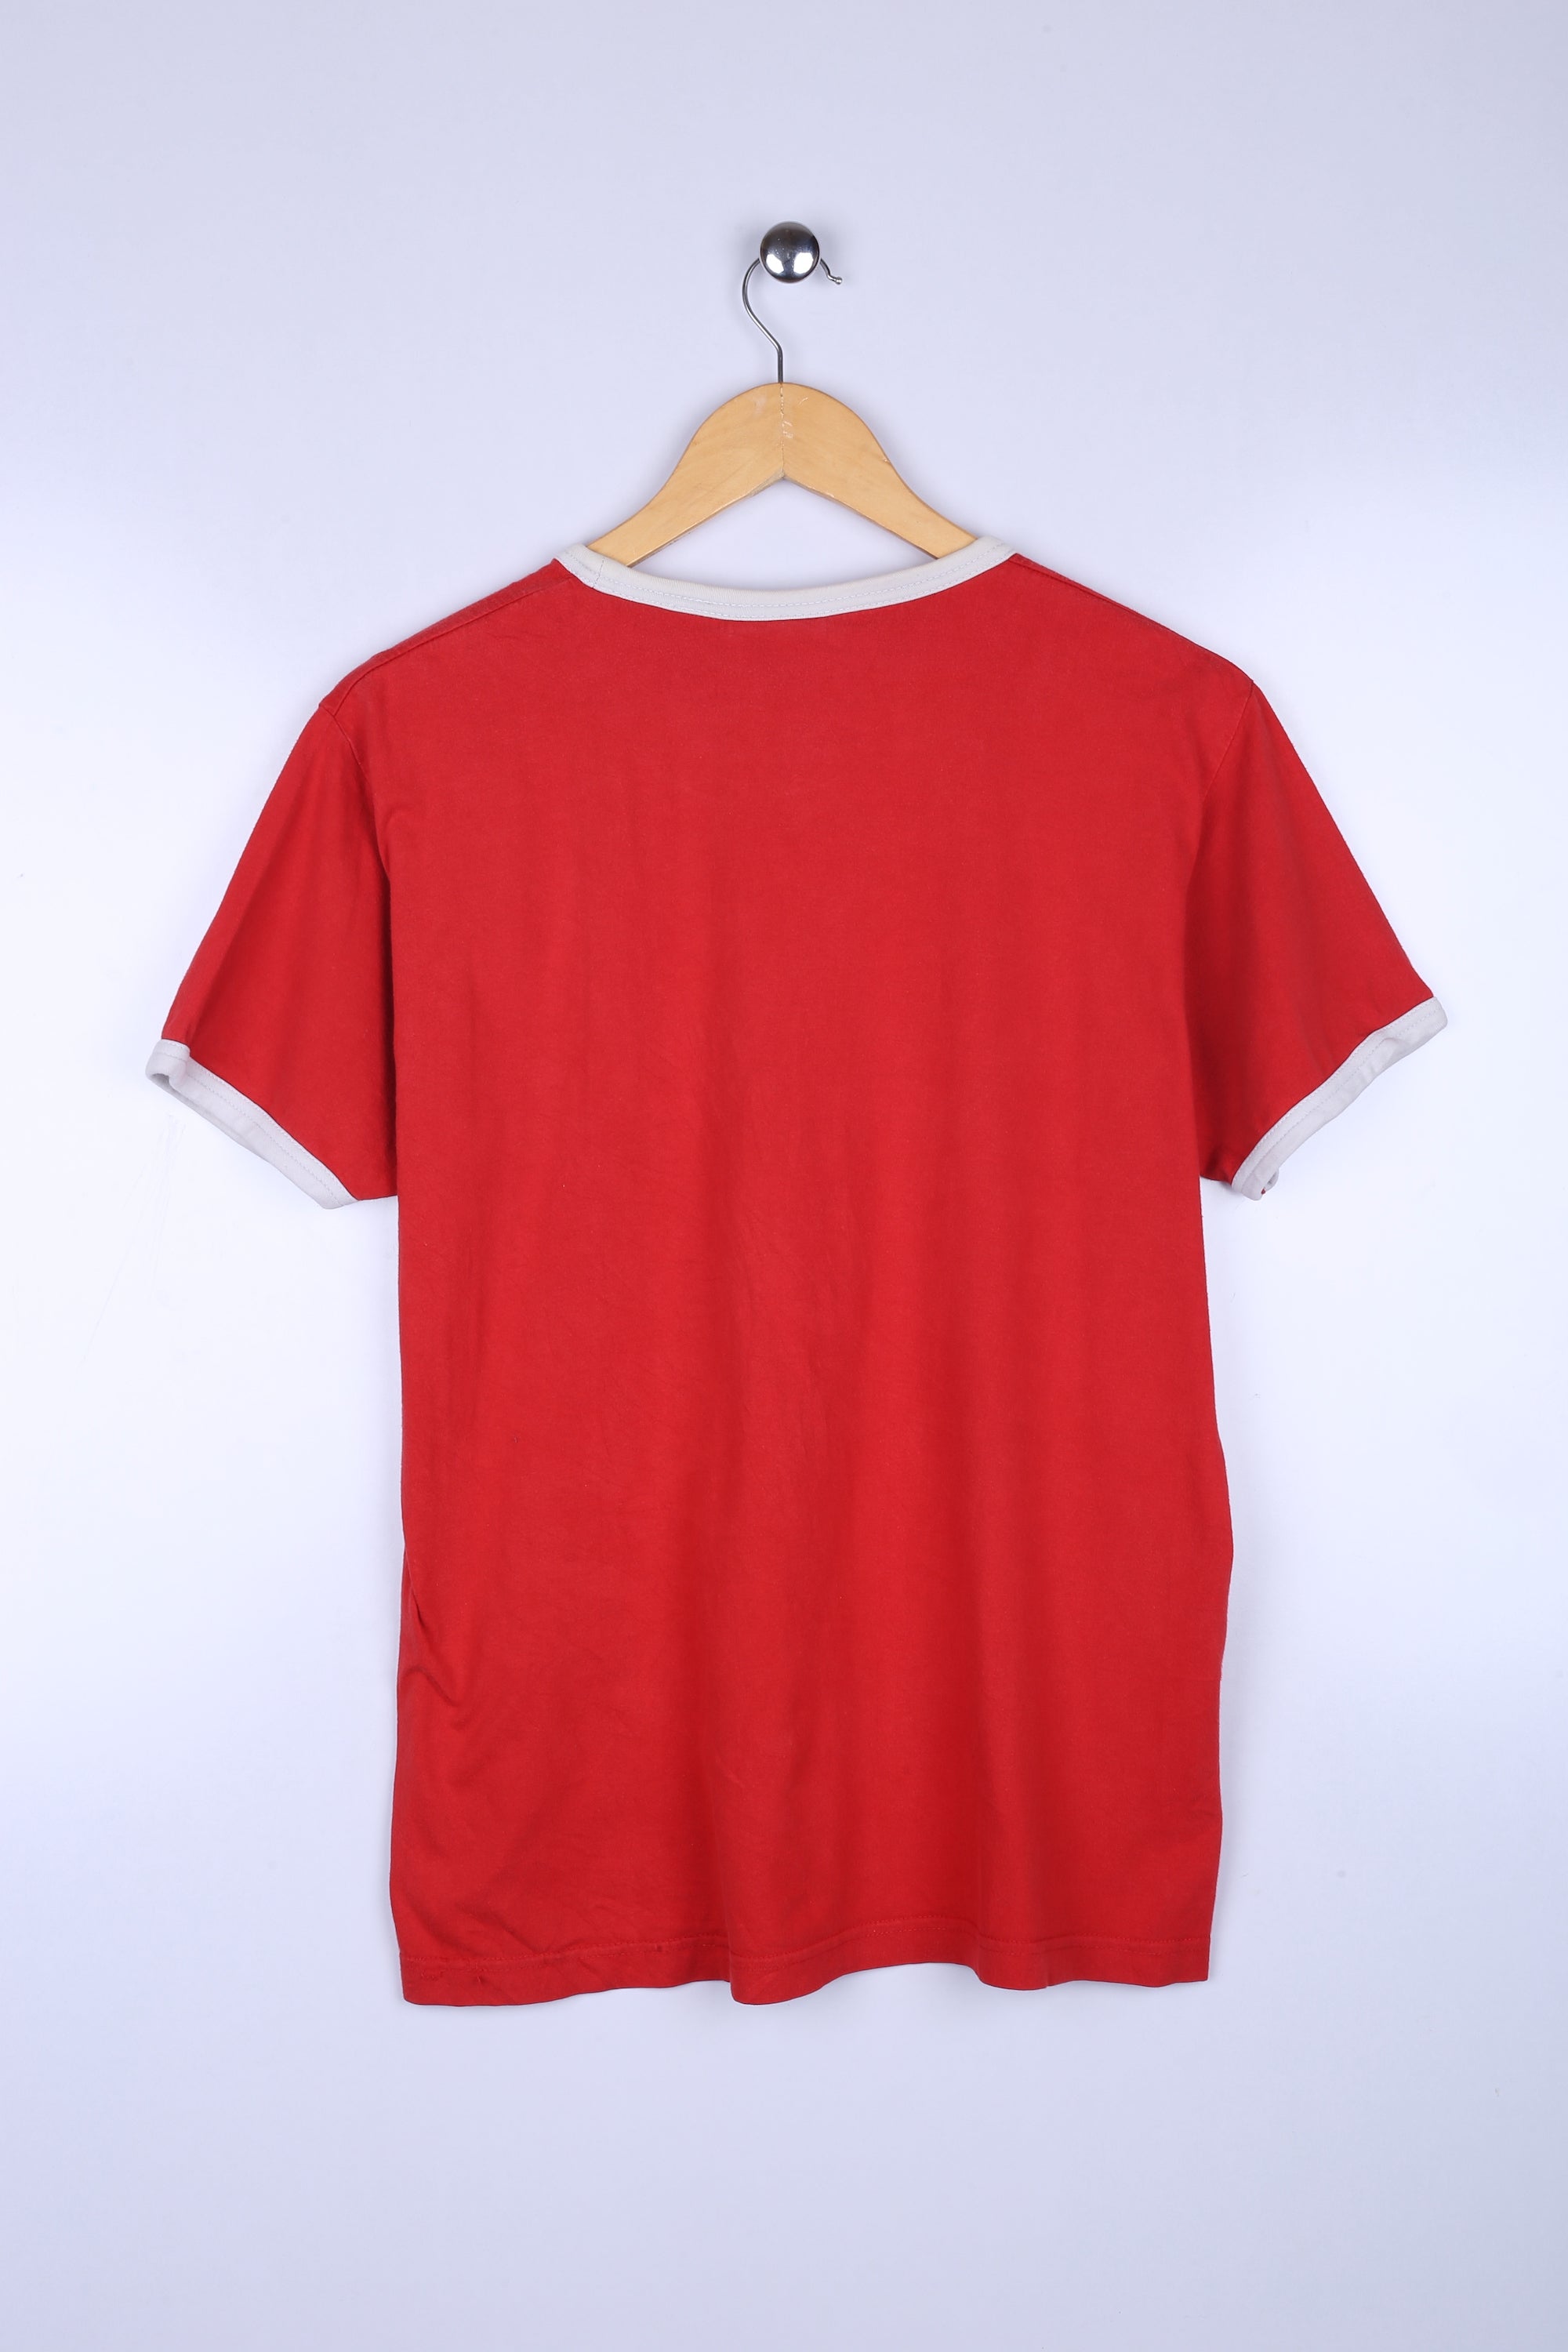 Vintage Army Bee Graphic Tee Red